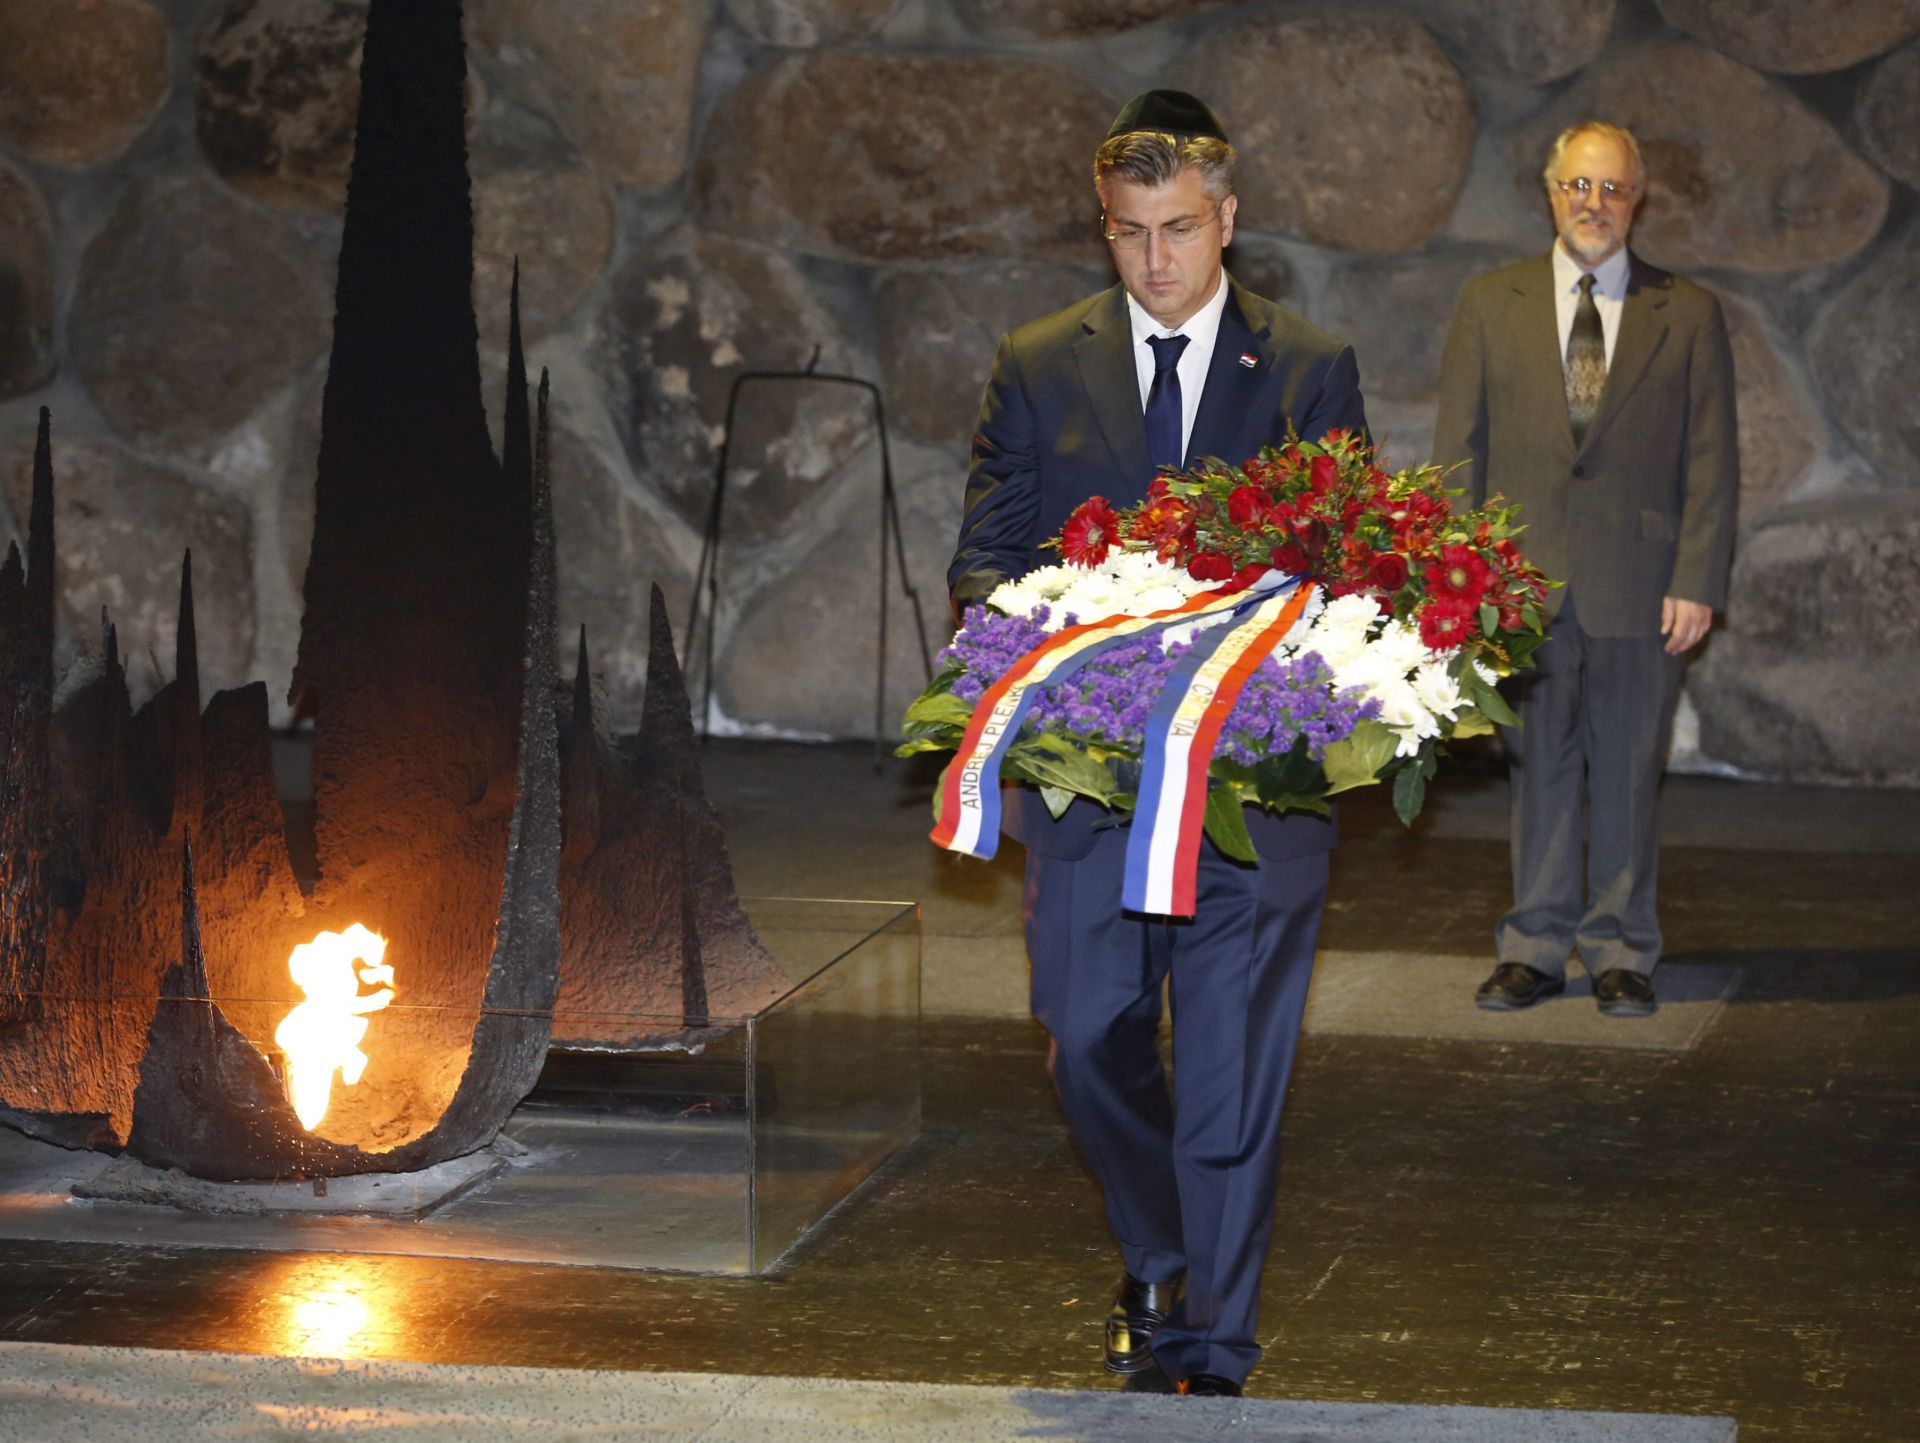 epa05746967 Croatian Prime Minister Andrej Plenkovic lays a wreath in the Hall of Remembrances at the  Yad Vashem Holocaust memorial museum in Jerusalem, Israel, 24 January 2017. Plenkovic visited the museum for honoring the six-million Jews who perished at the hands of the Nazis during the Holocaust of World War II.  EPA/ABIR SULTAN